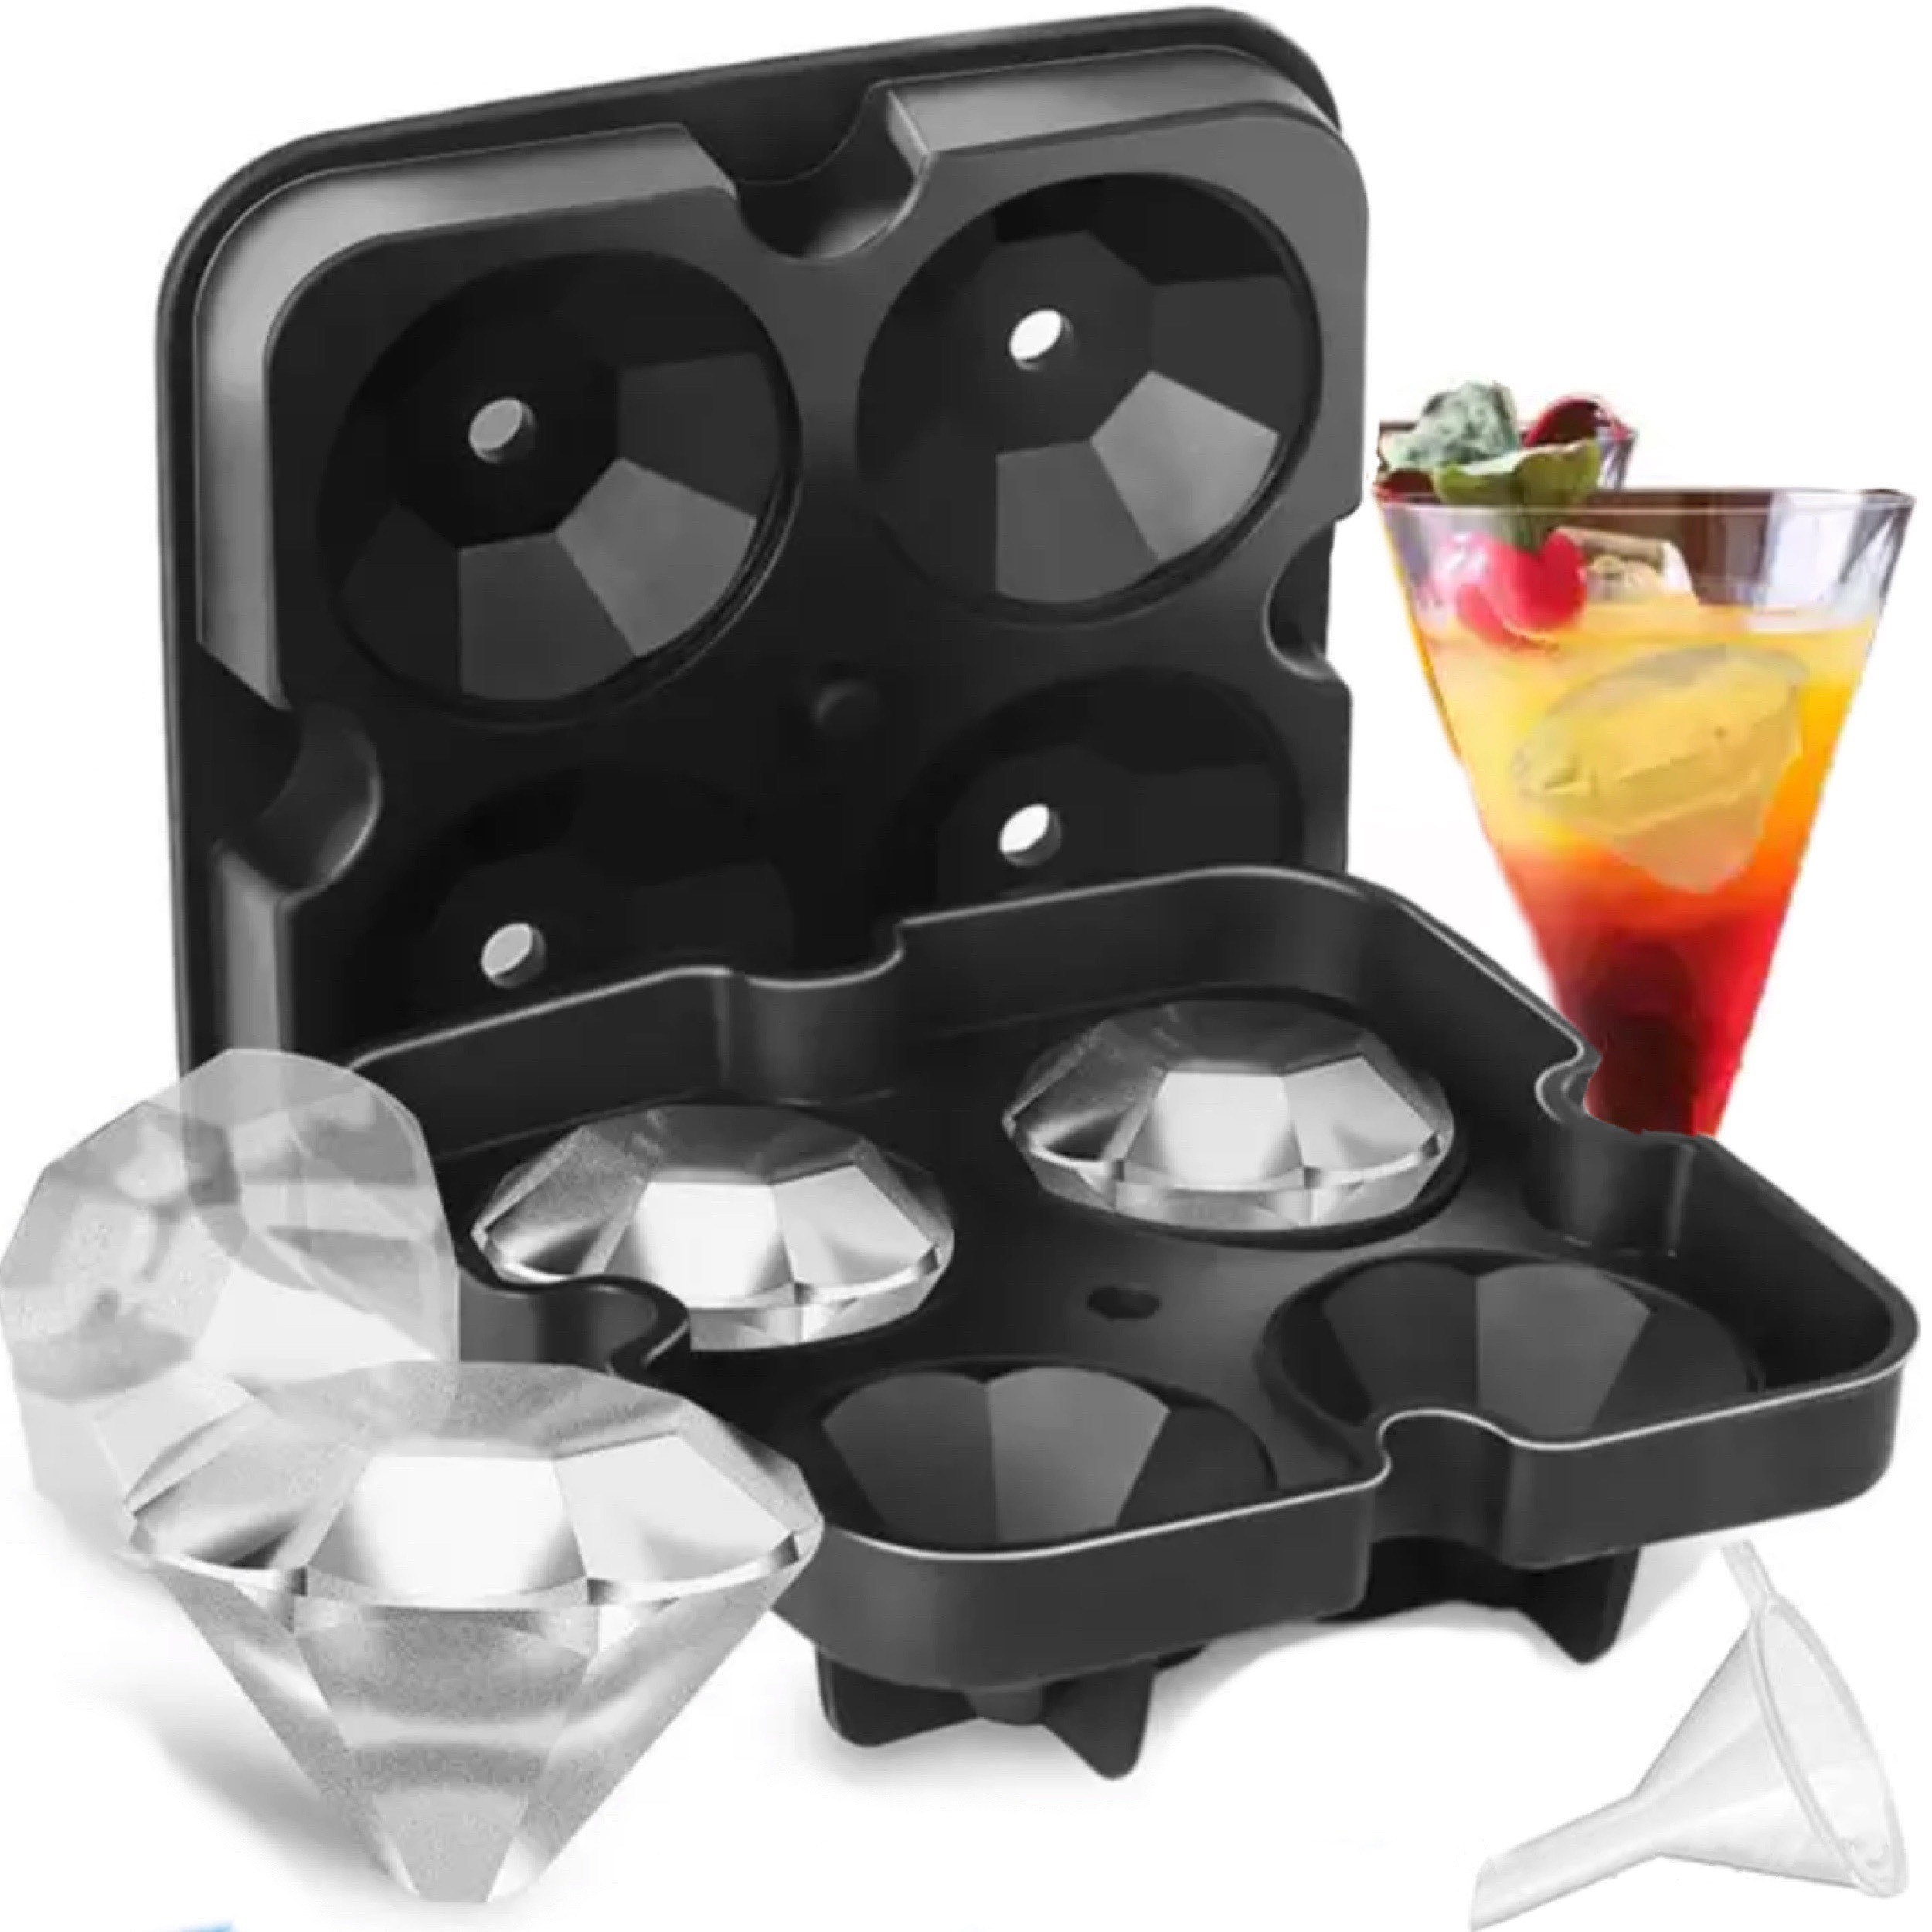 ON THE ROCK Ice Cube DIAMOND AND SPHERE MOLDS SET OF 4} BPA FREE. 